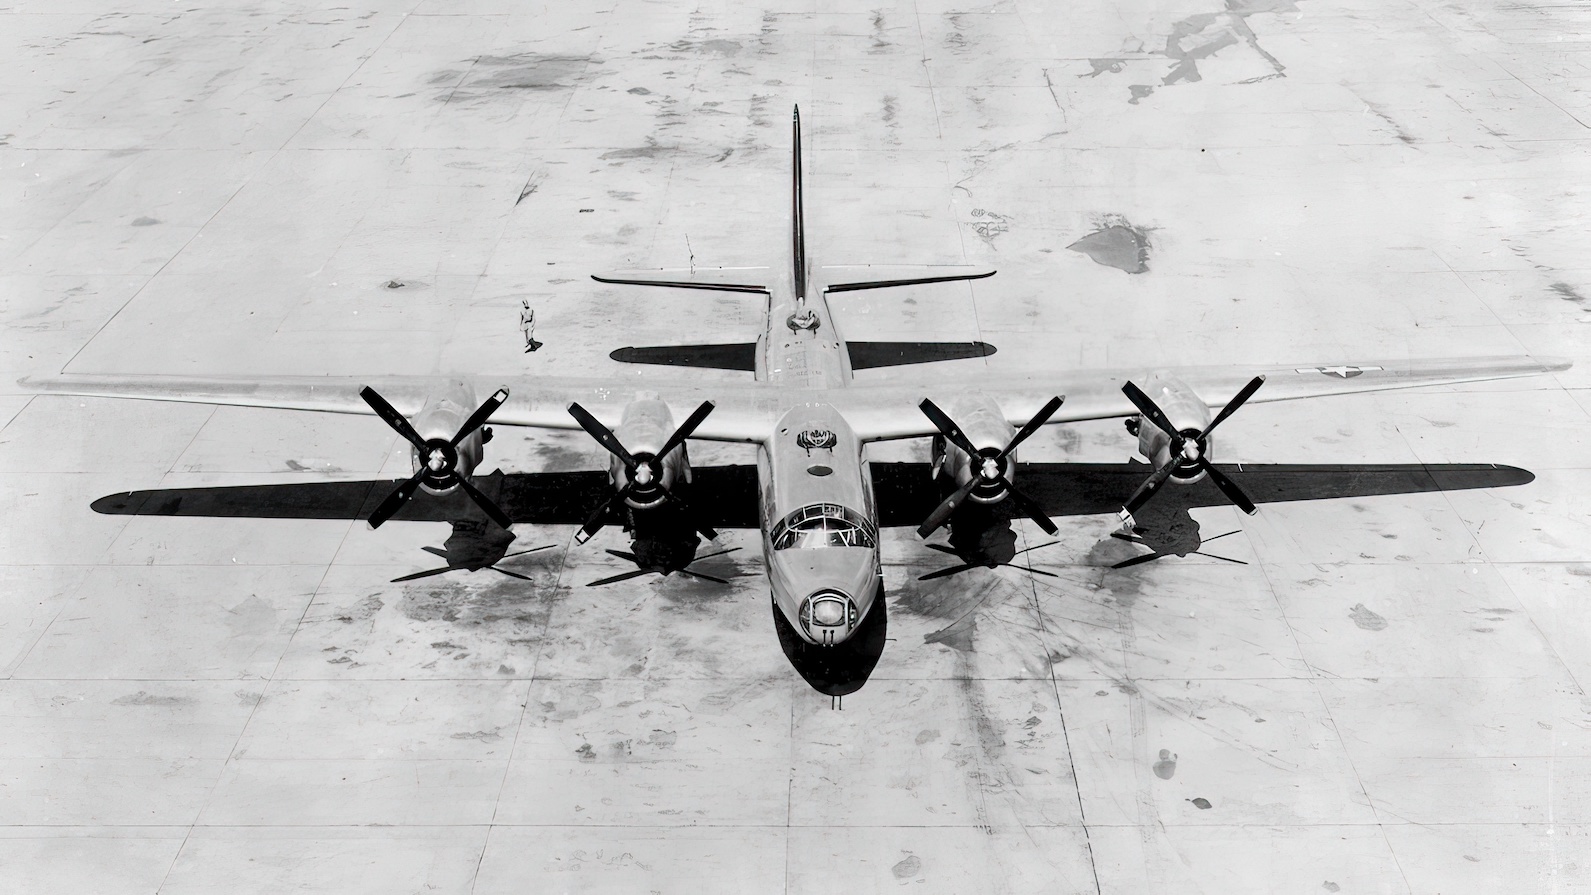 Consolidated B-32